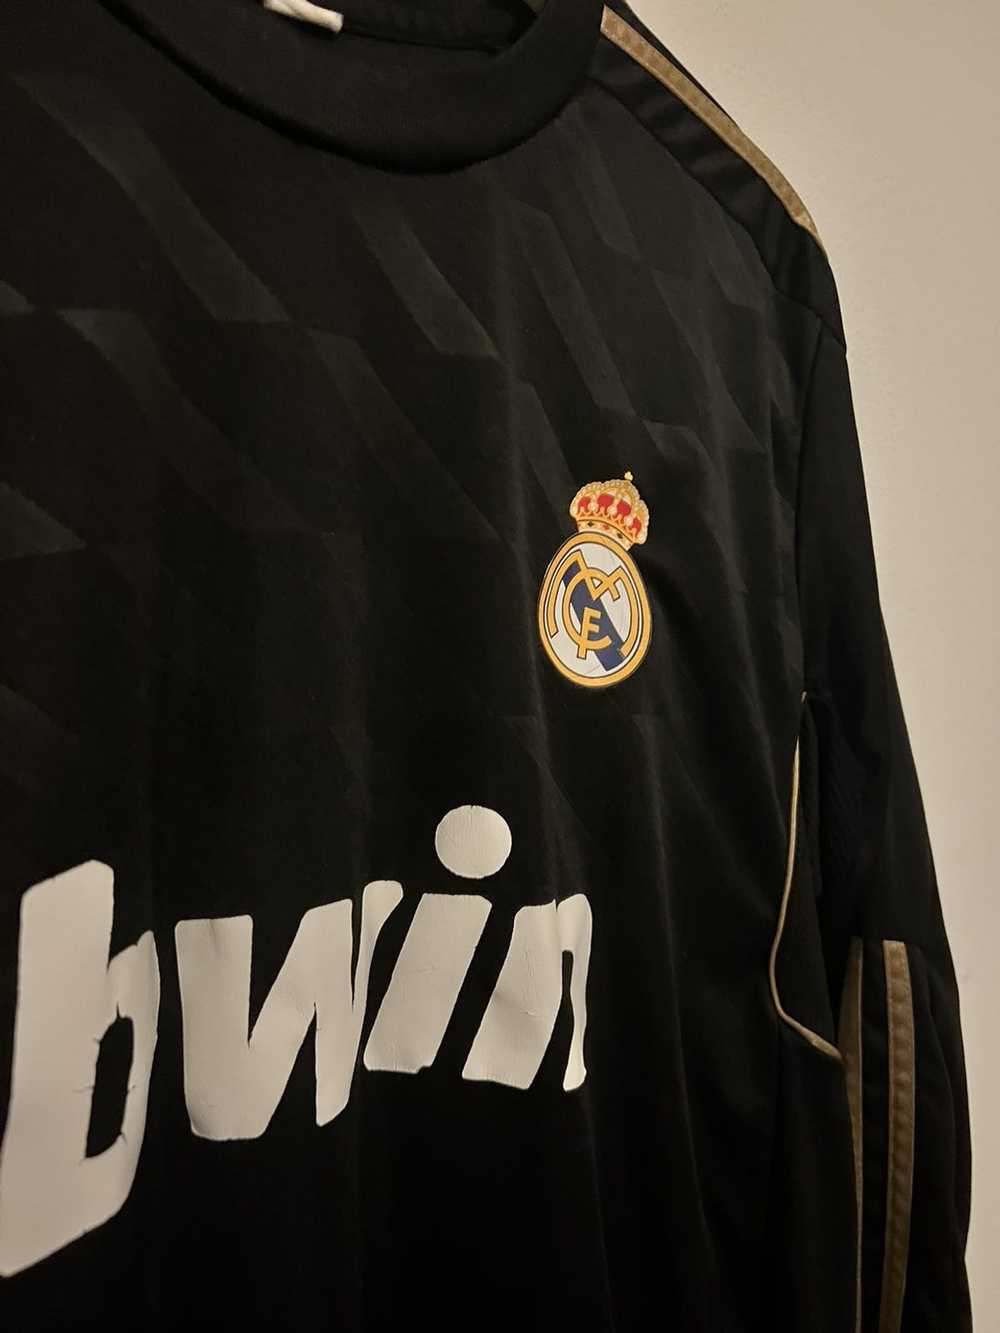 Real Madrid Real Madrid long sleeve jersey - image 3